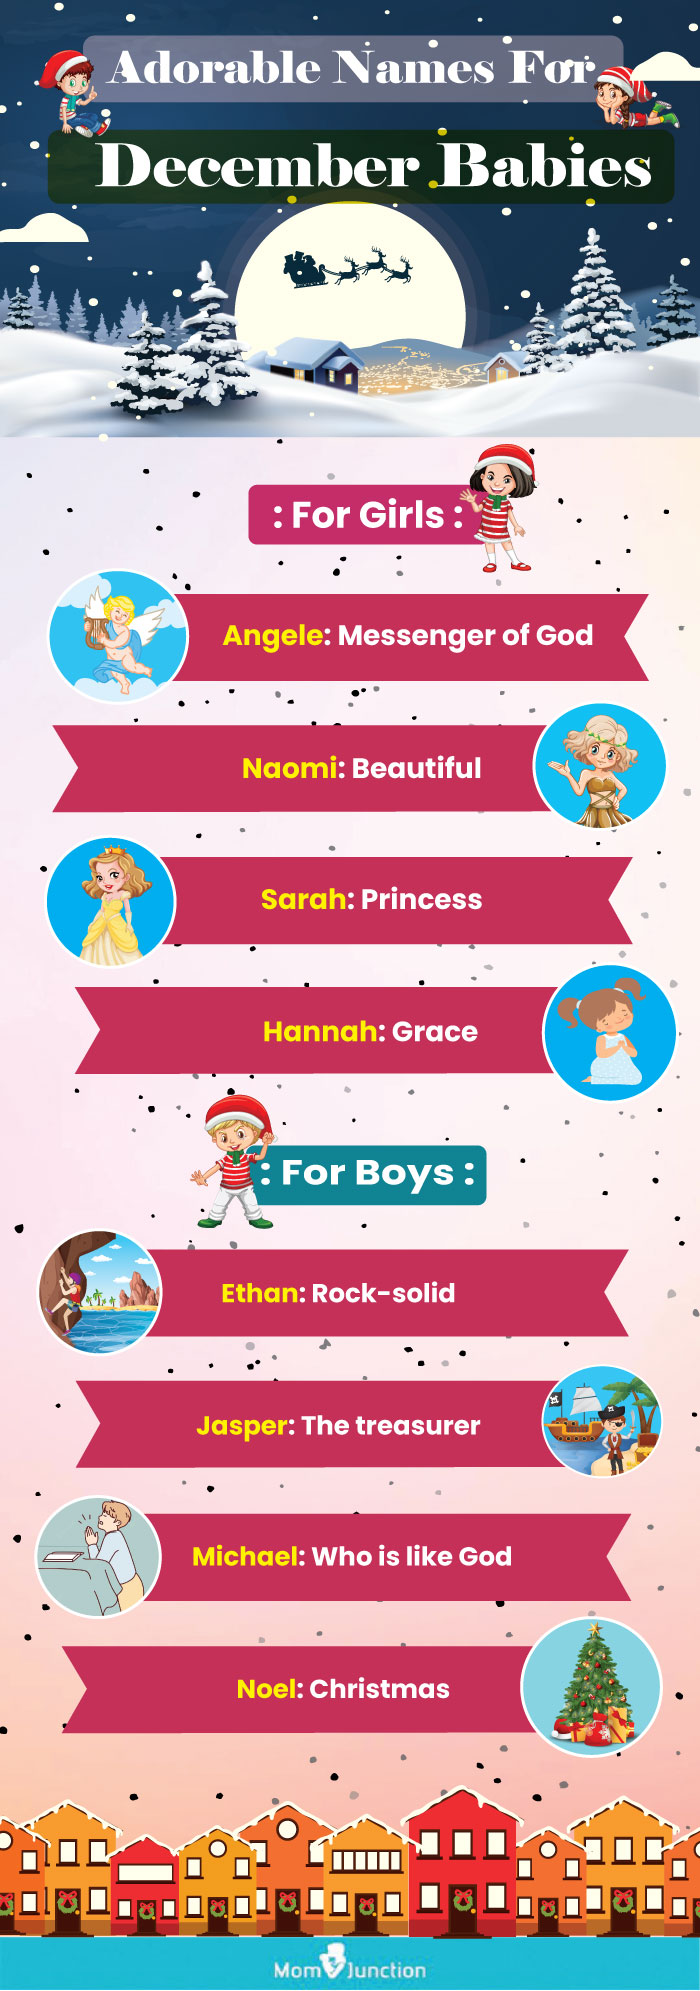 adorable names for december babies [infographic]